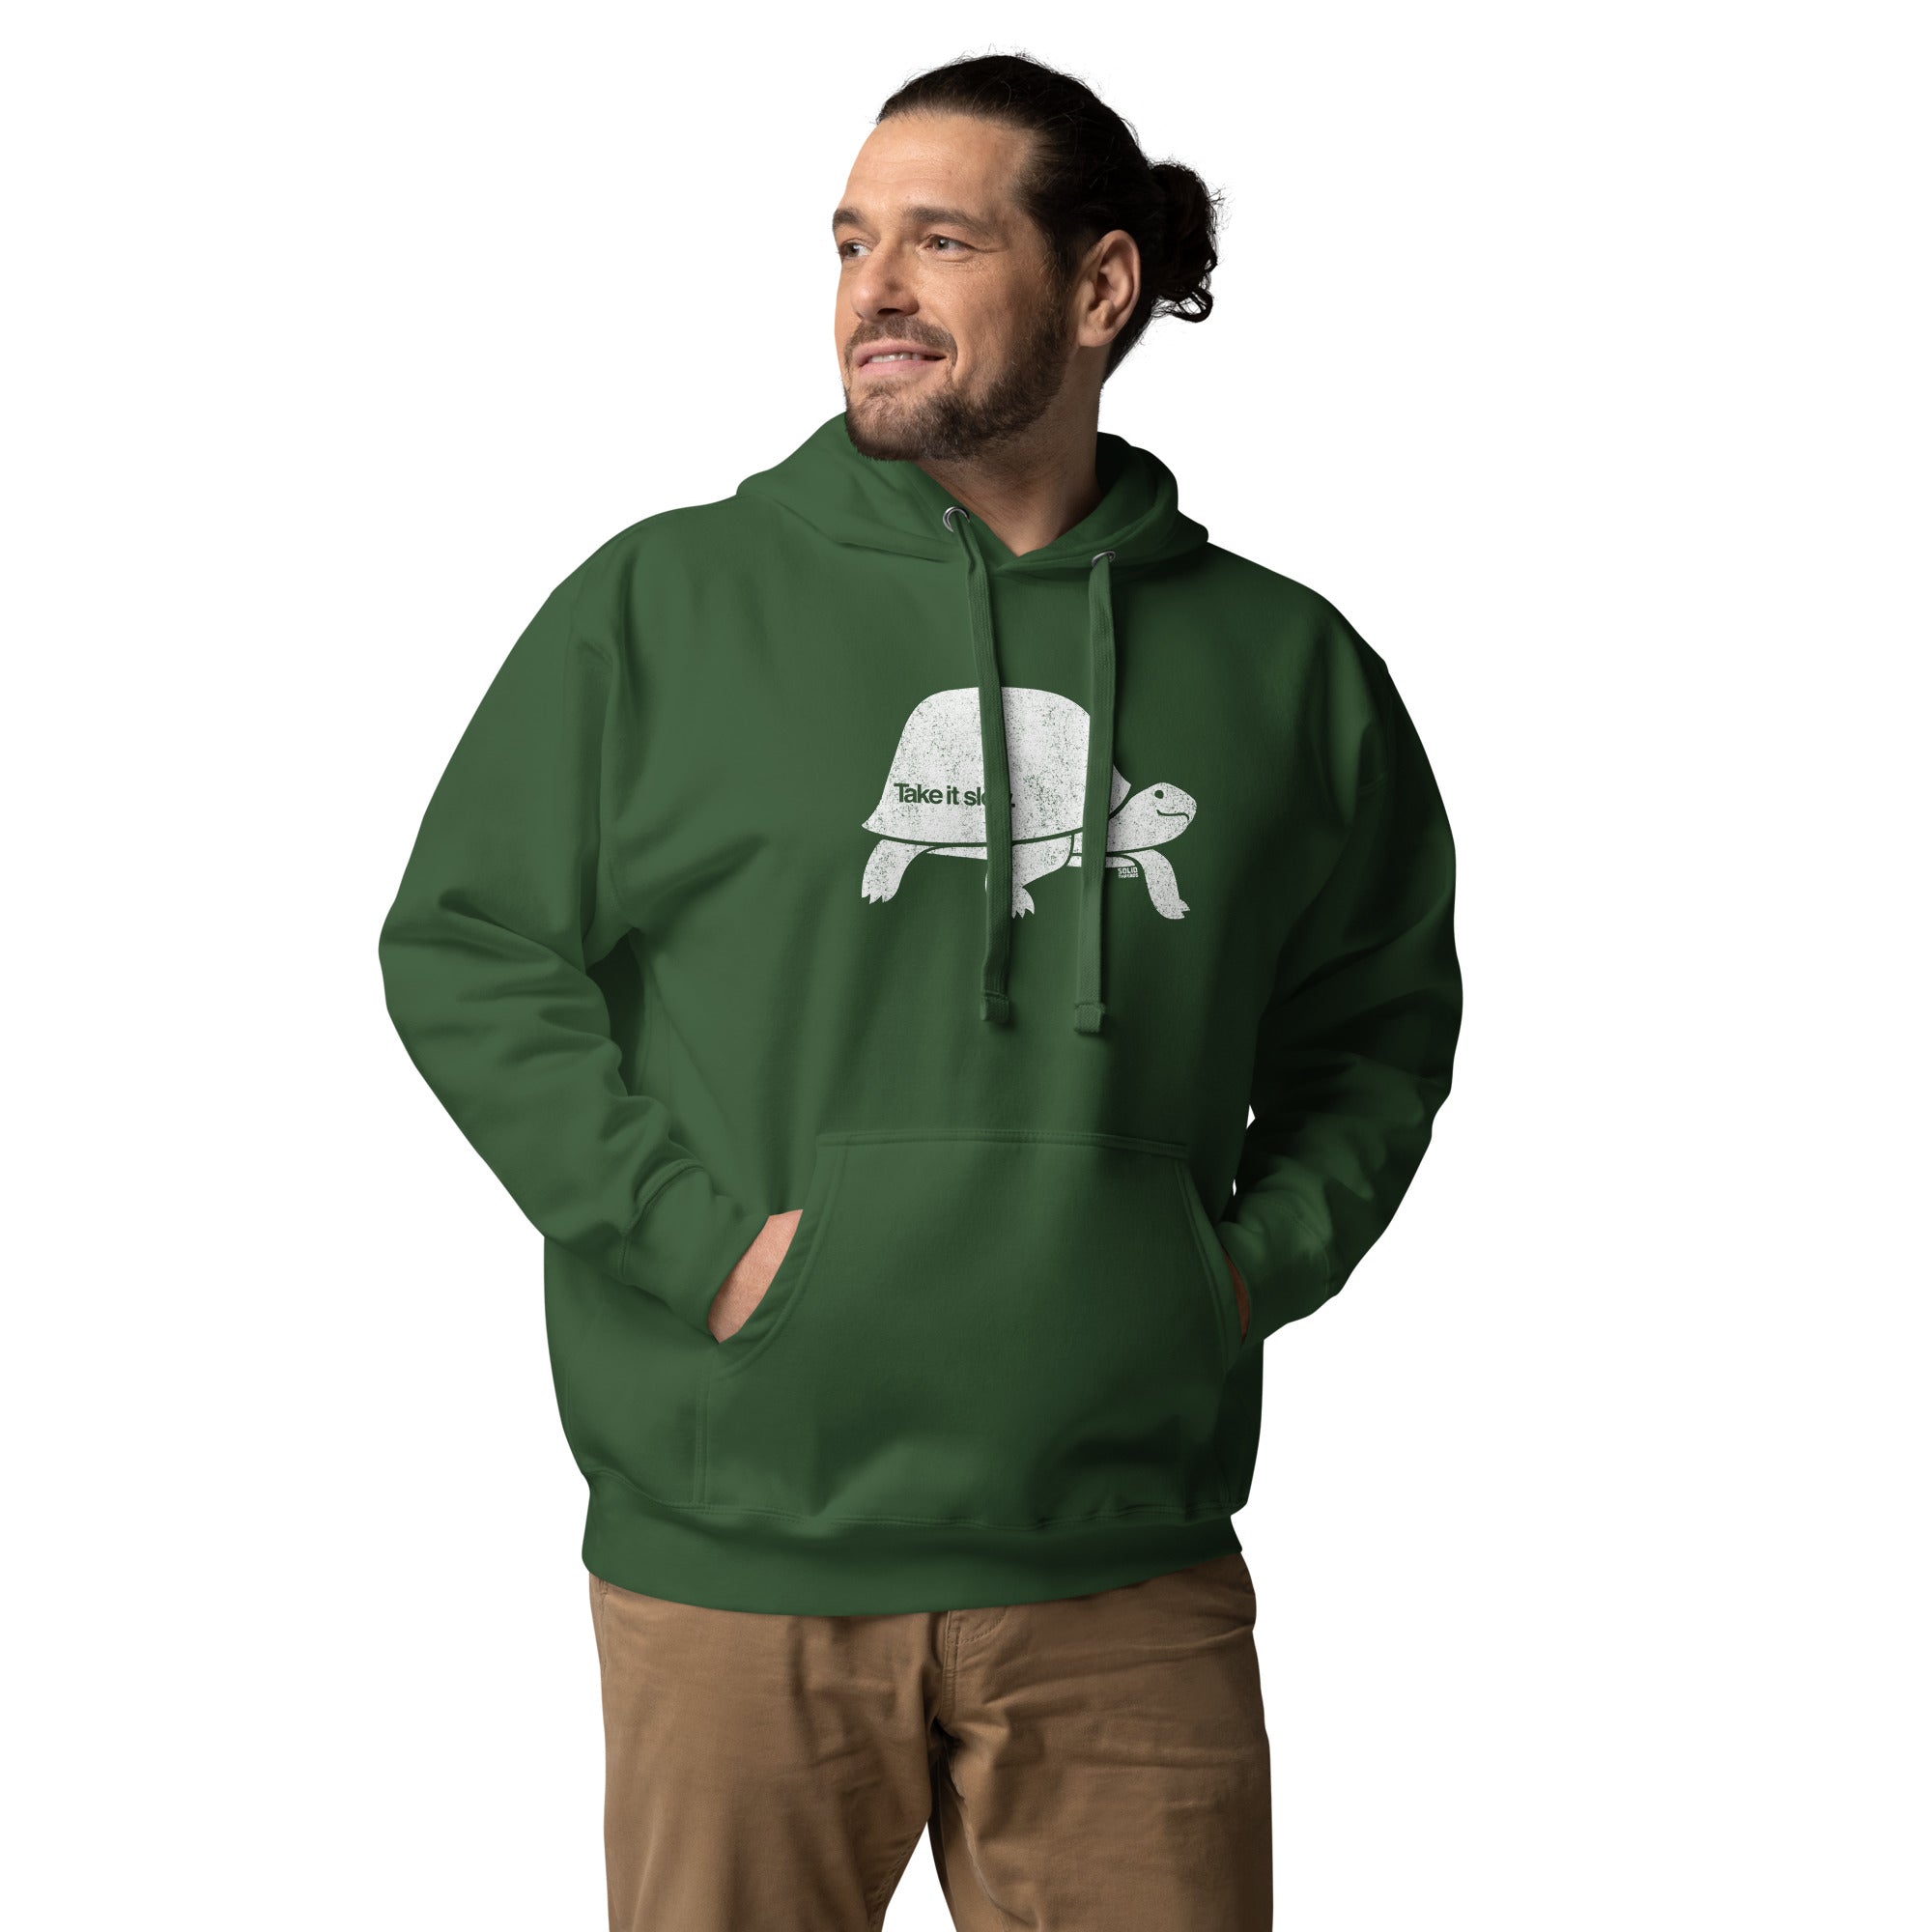 Take It Slow Vintage Classic Pullover Hoodie | Cool Turtle Fleece On Model | Solid Threads